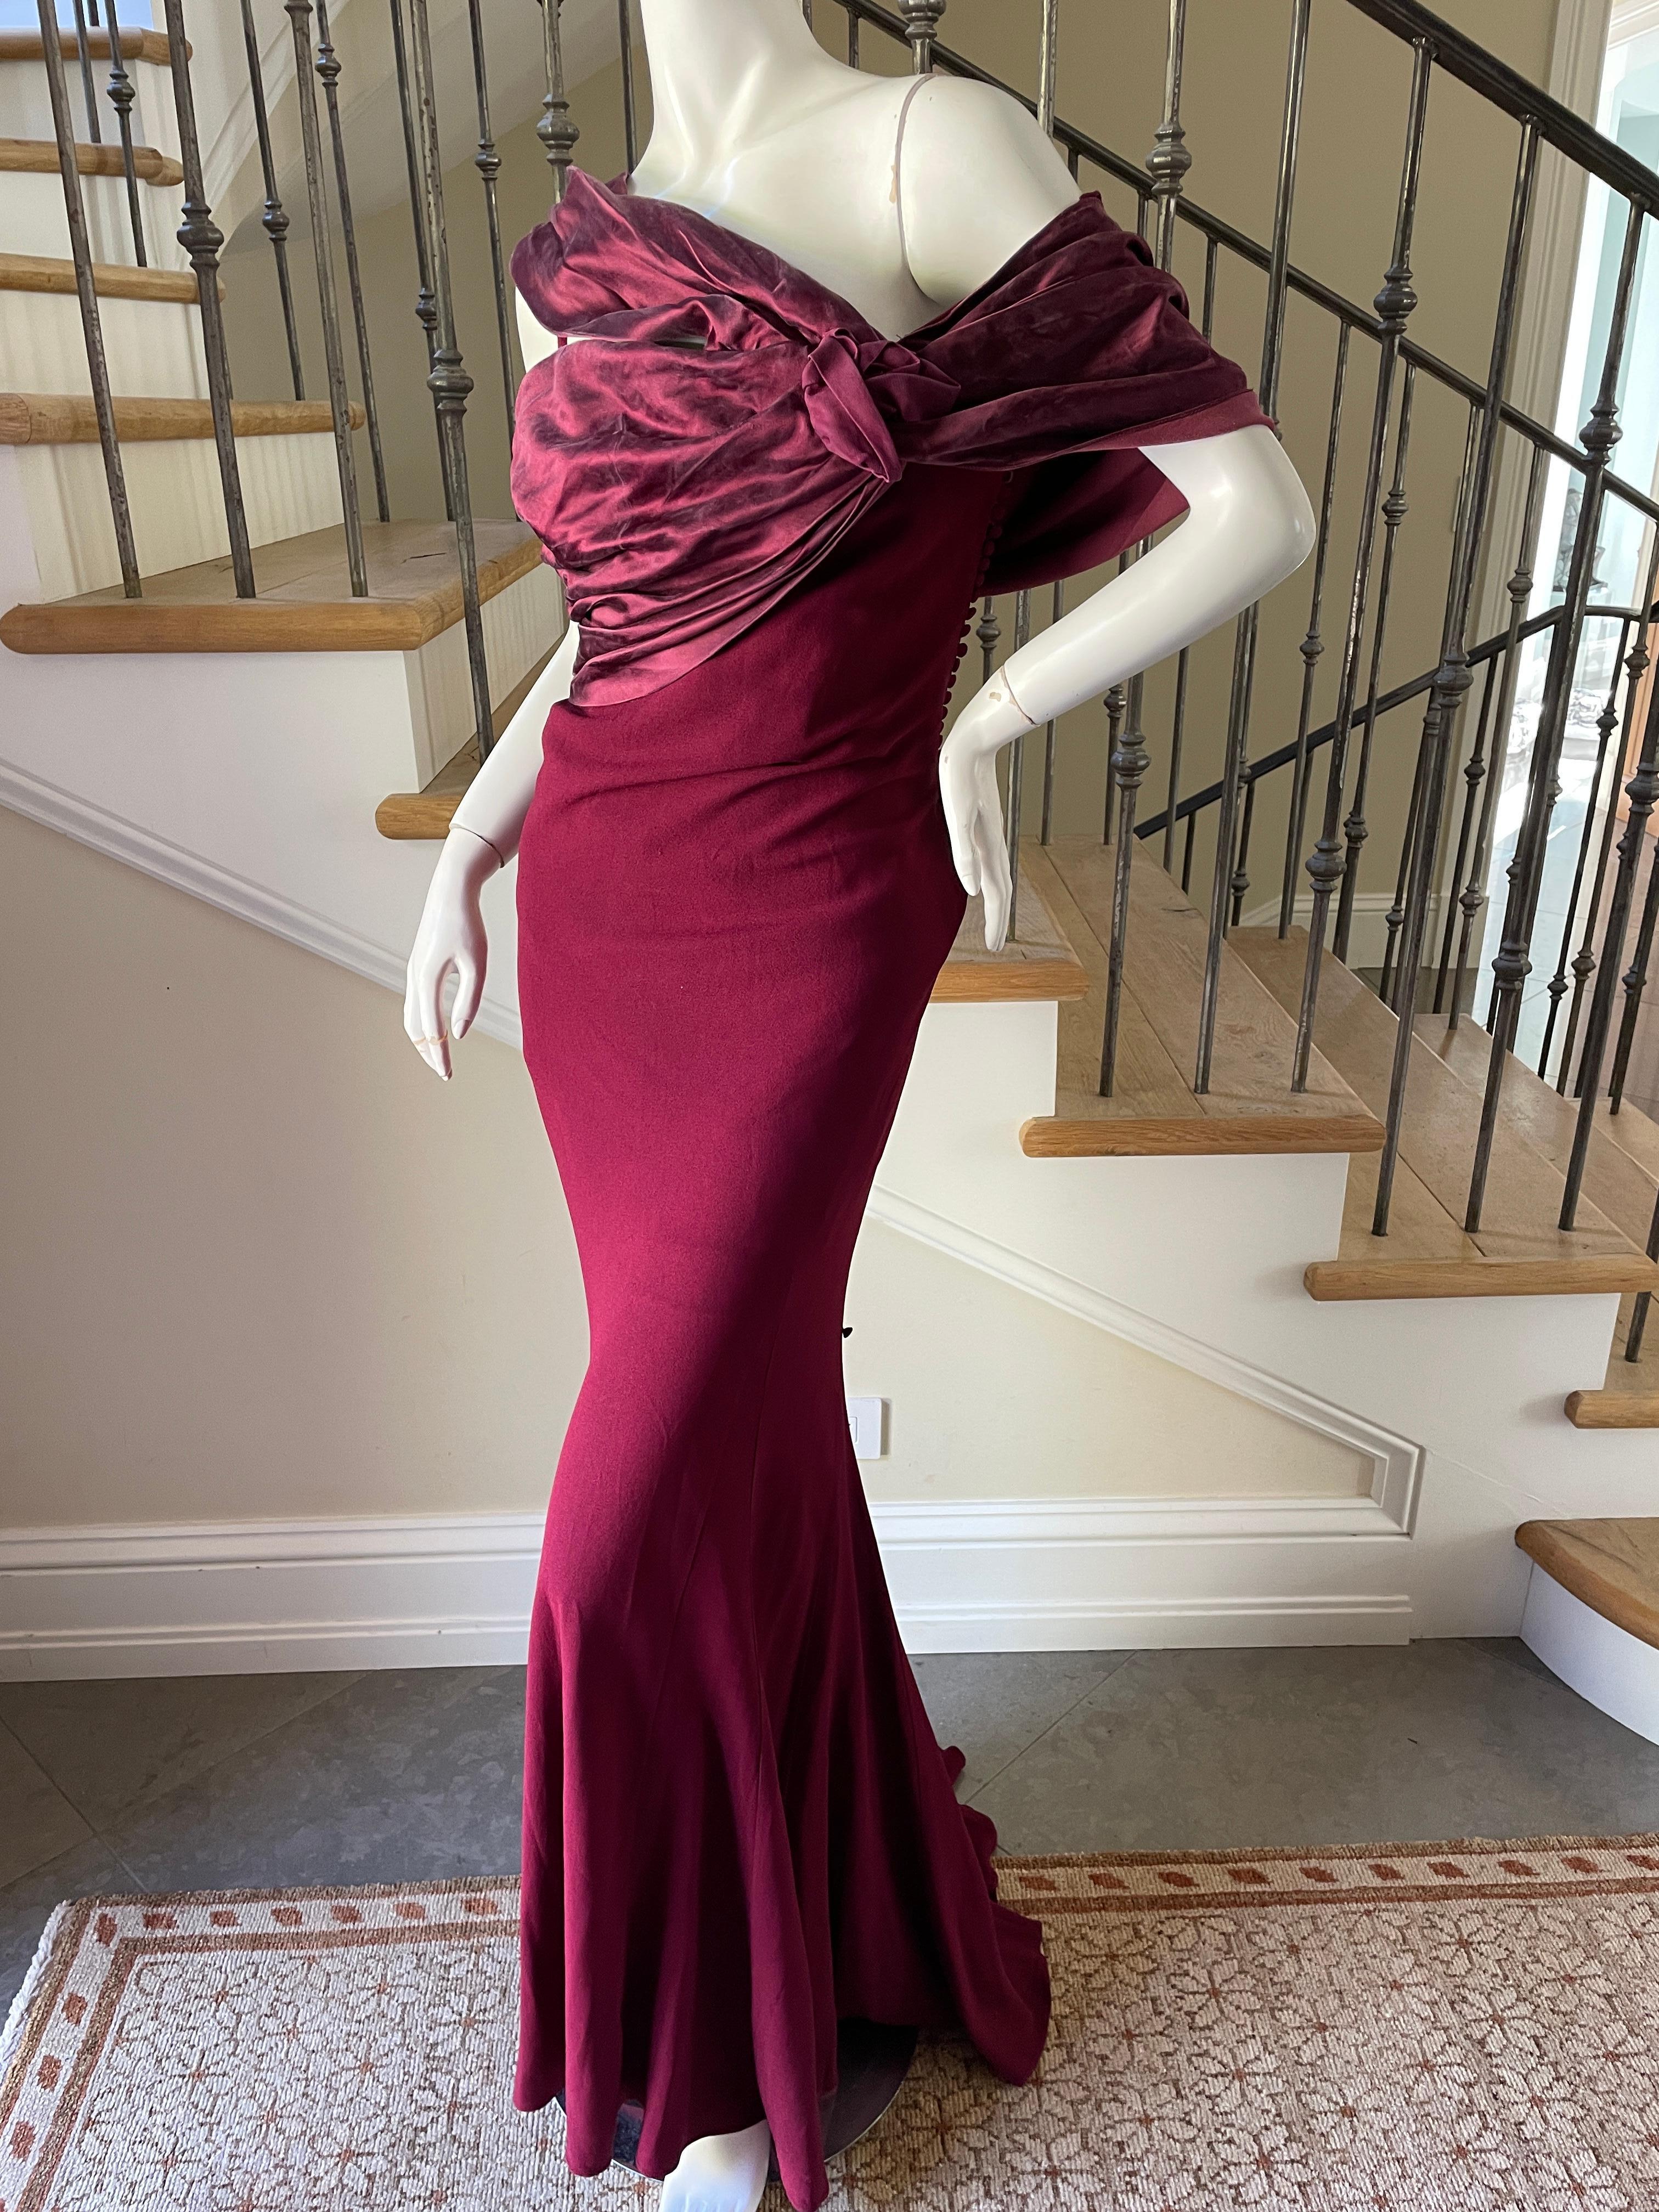 Women's Christian Dior by John Galliano Burgundy Red Draped Evening Dress For Sale